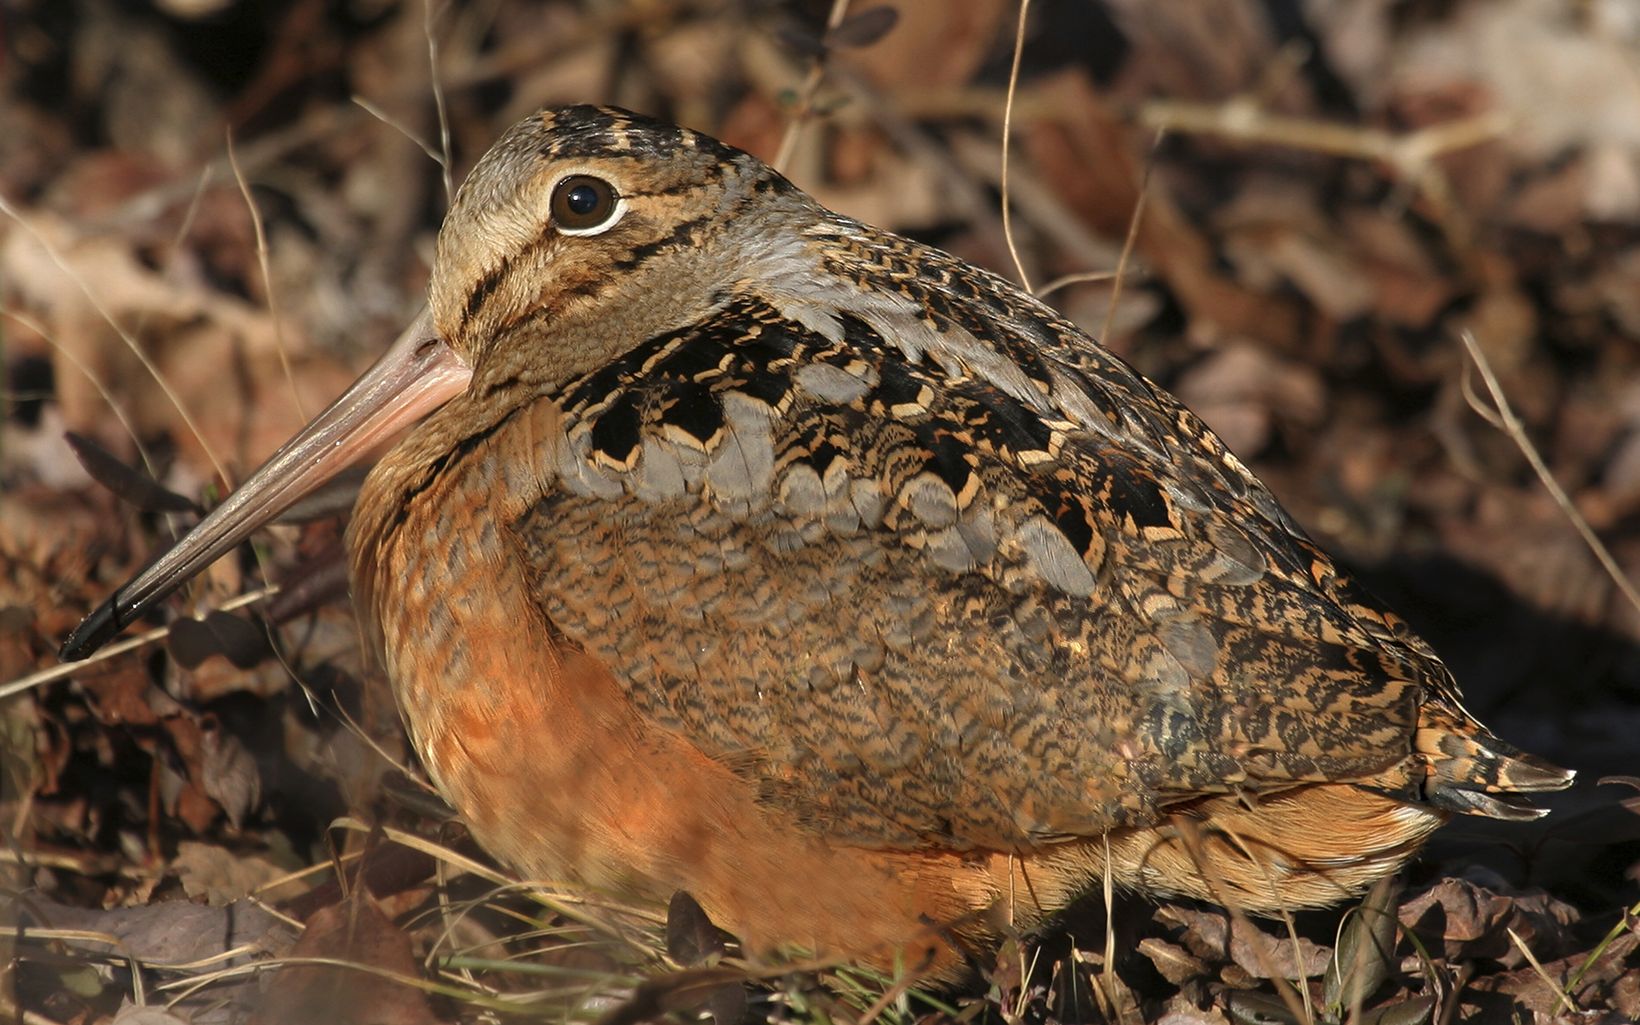 A brown bird with a long beak sitting in leaf litter.